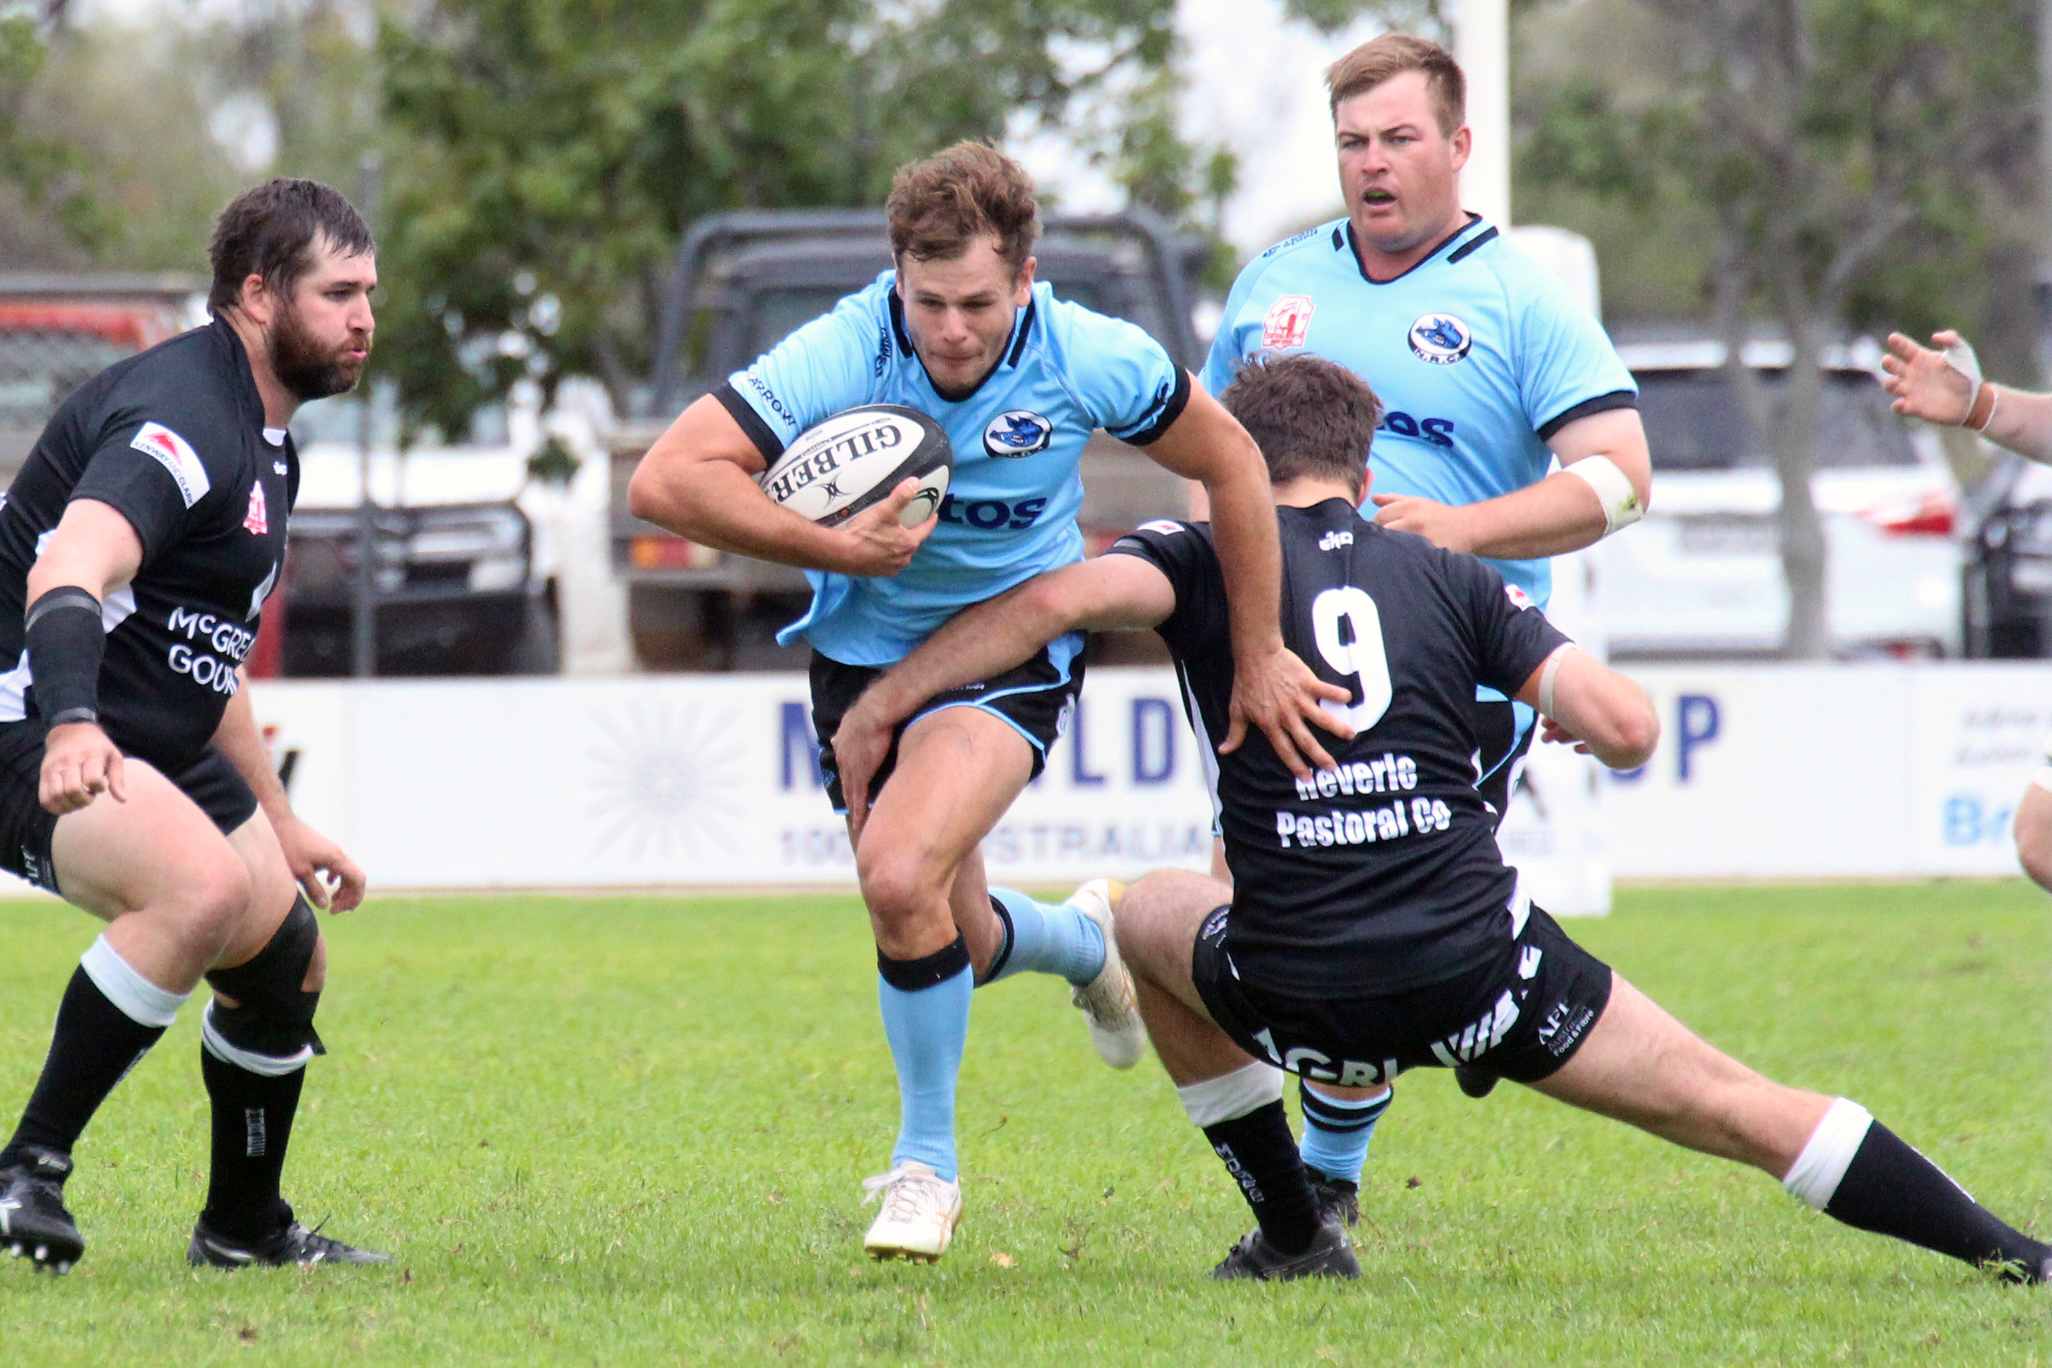 Bulls take down the Blue Boars at Weebolla Oval but Gleeson happy with his side’s performance